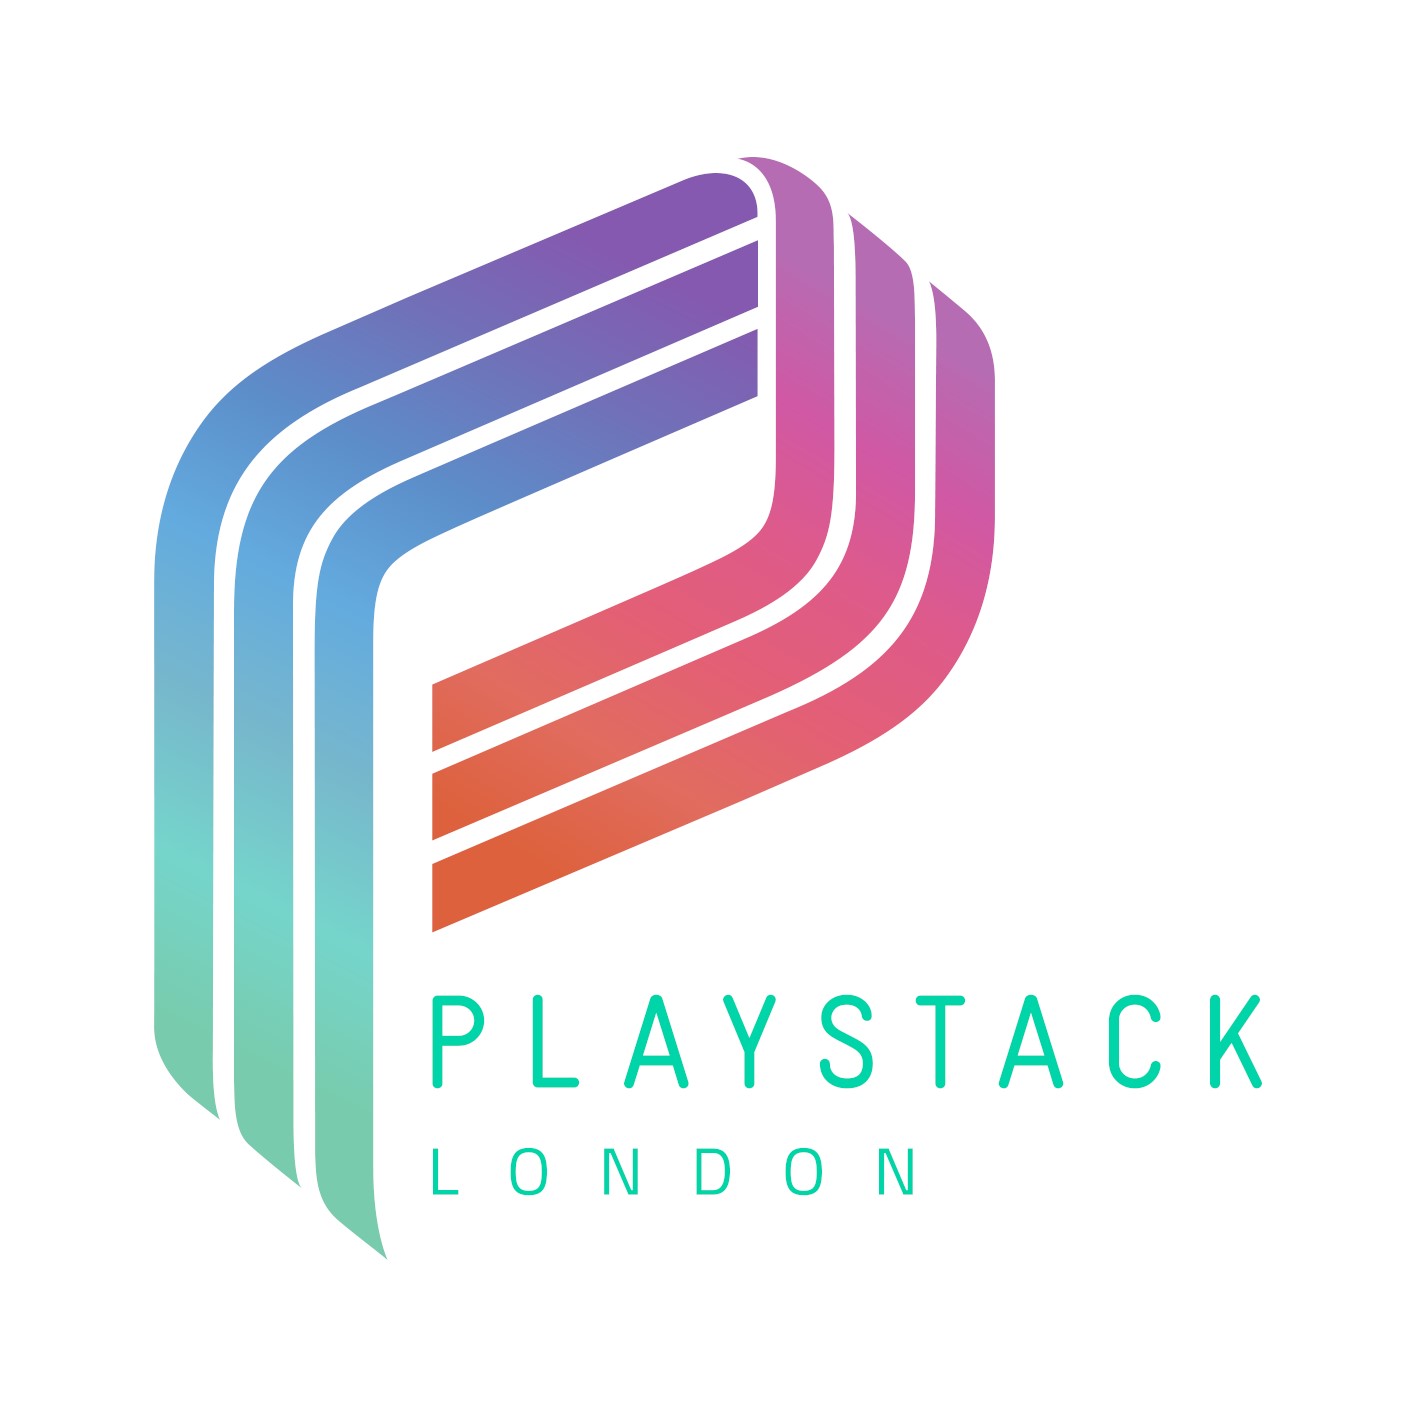 Playstack enters into Letter of Intent for sale of Interact platform